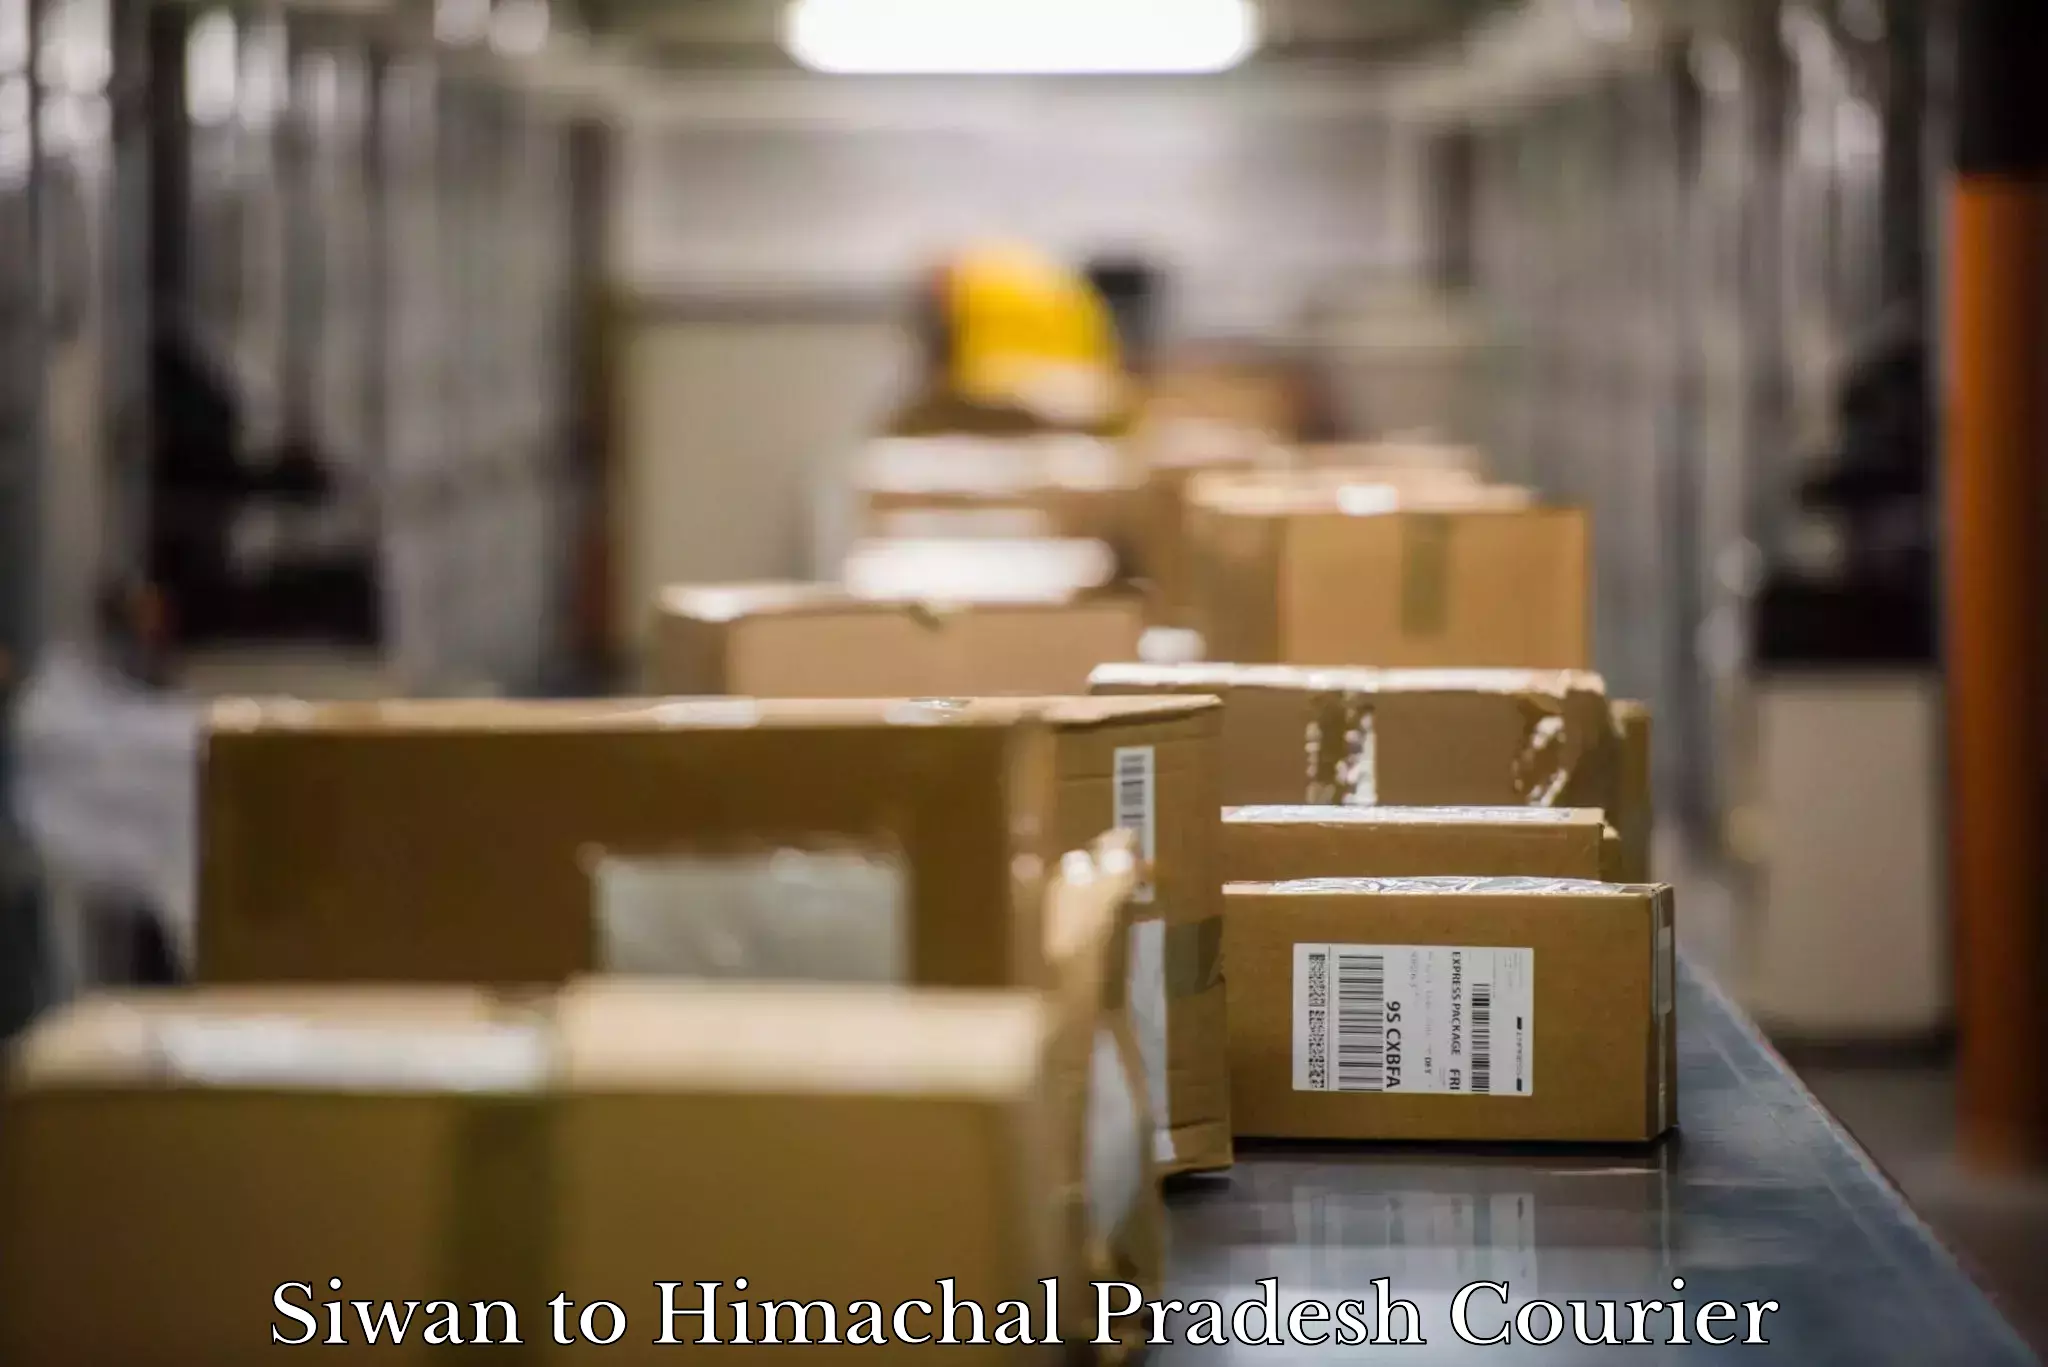 Professional packing services Siwan to Jukhala